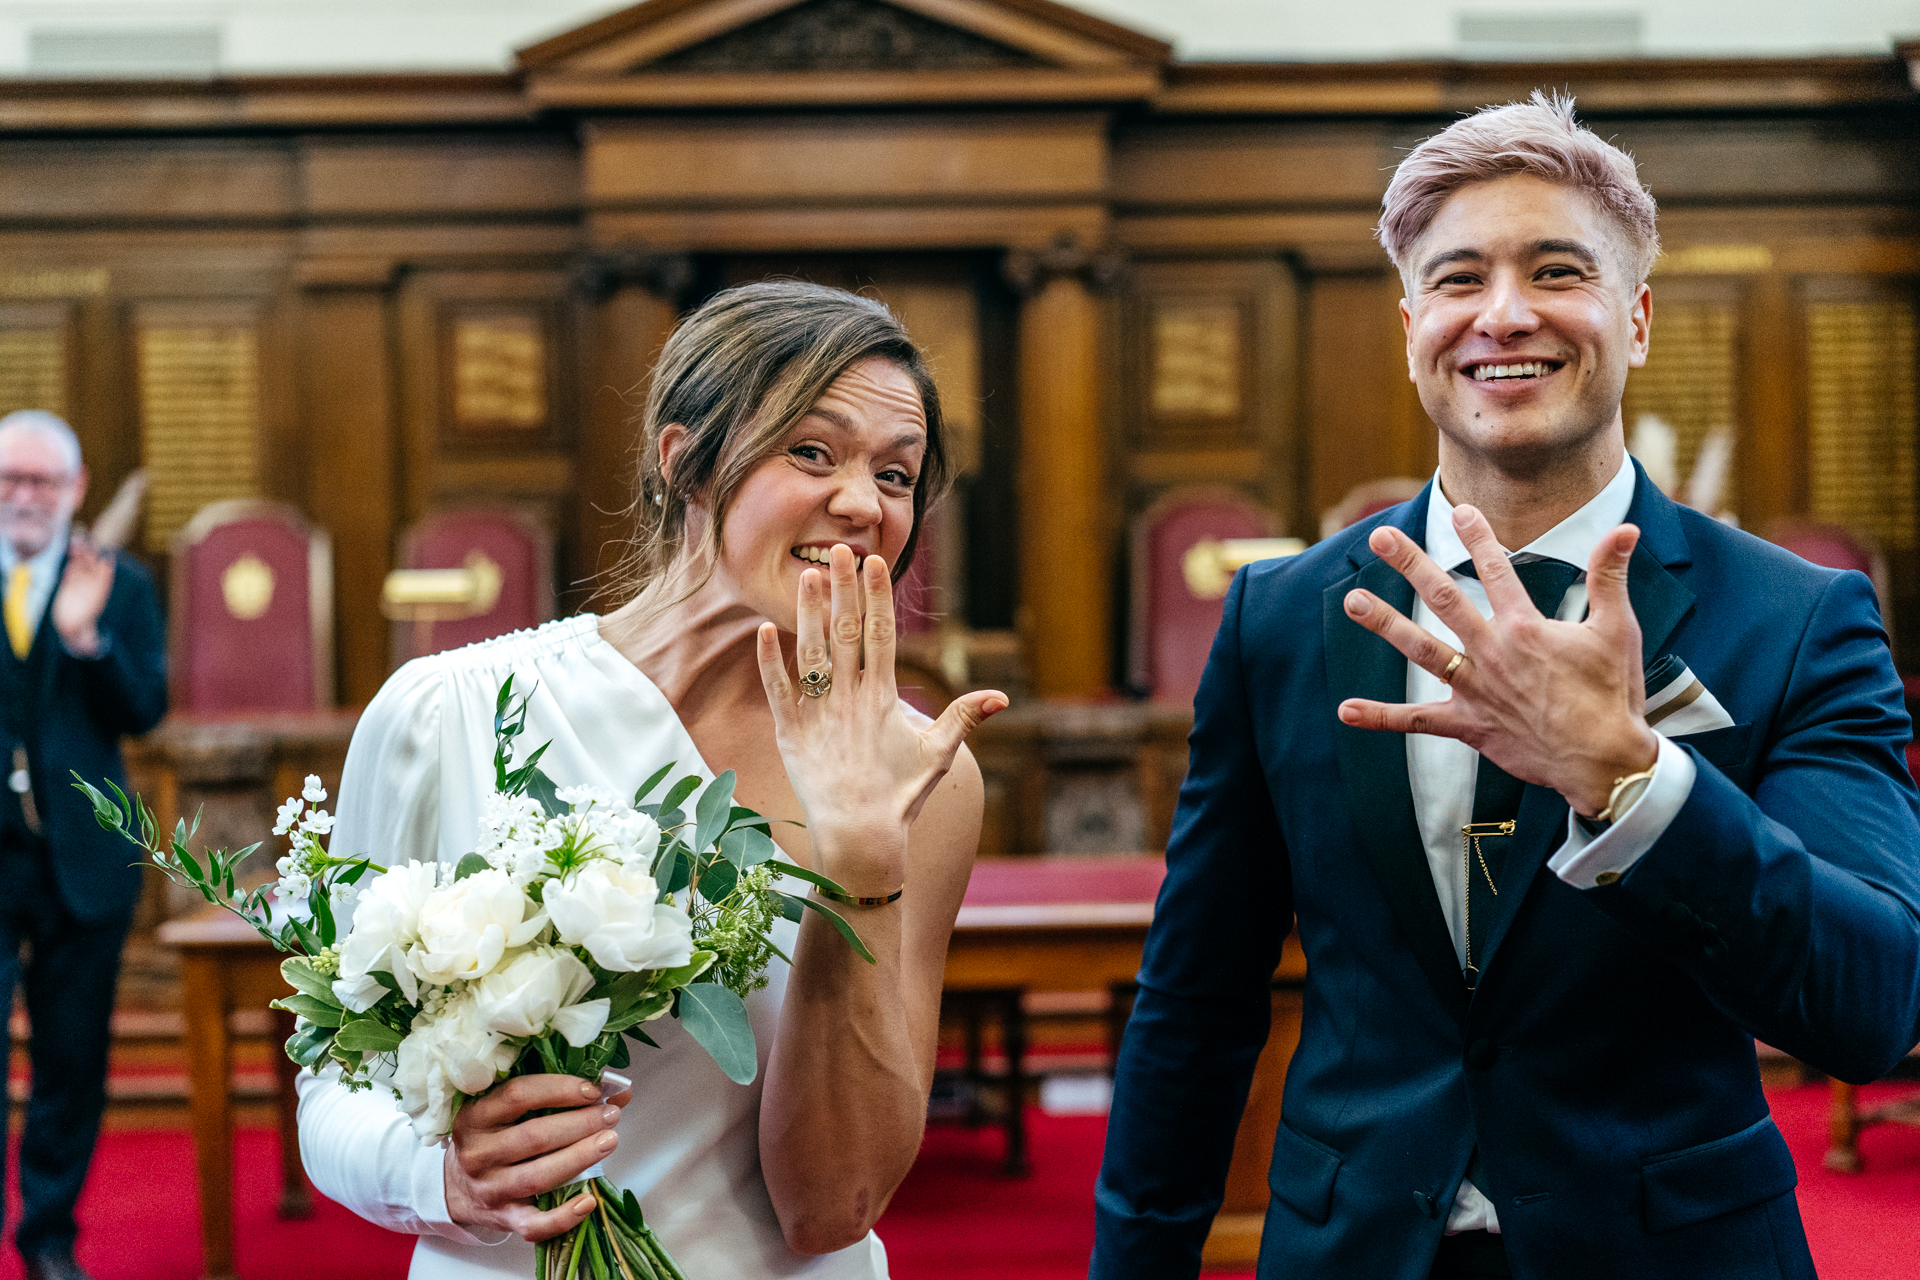 bride and groom show the photographer their rings as they walk down the aisle freshly married in Islington, London